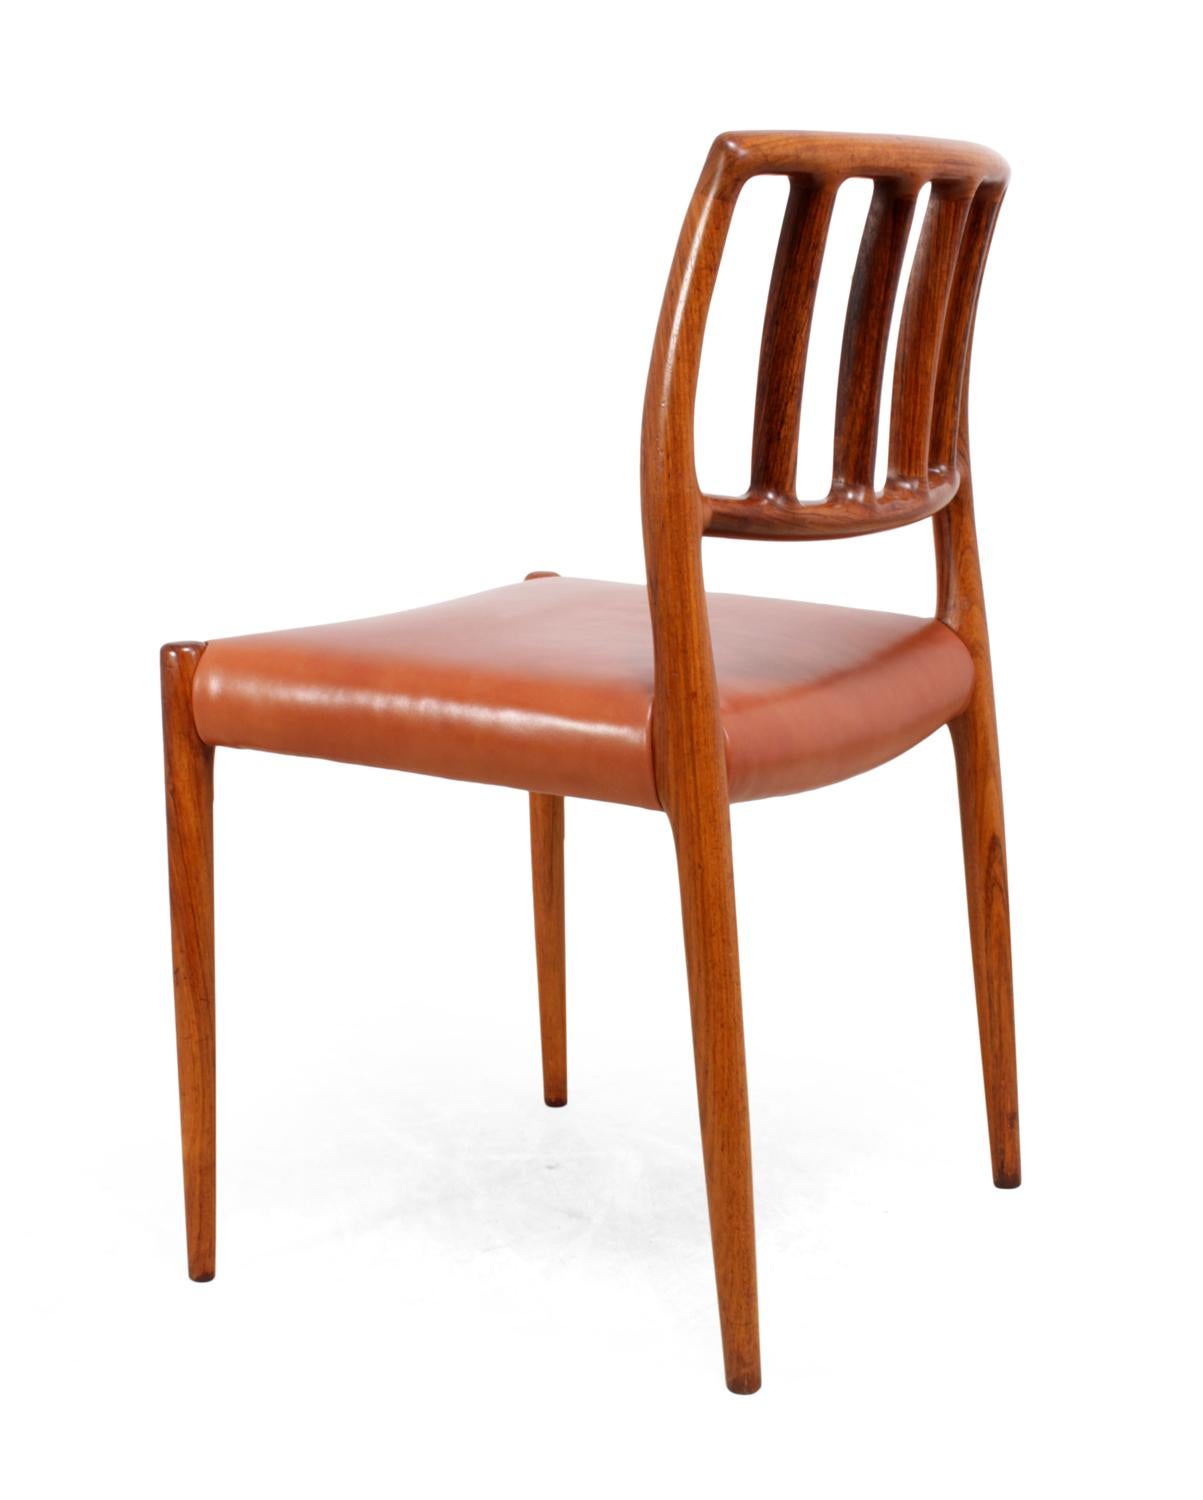 Leather Midcentury Rosewood Dining Chairs by Moller Model 83